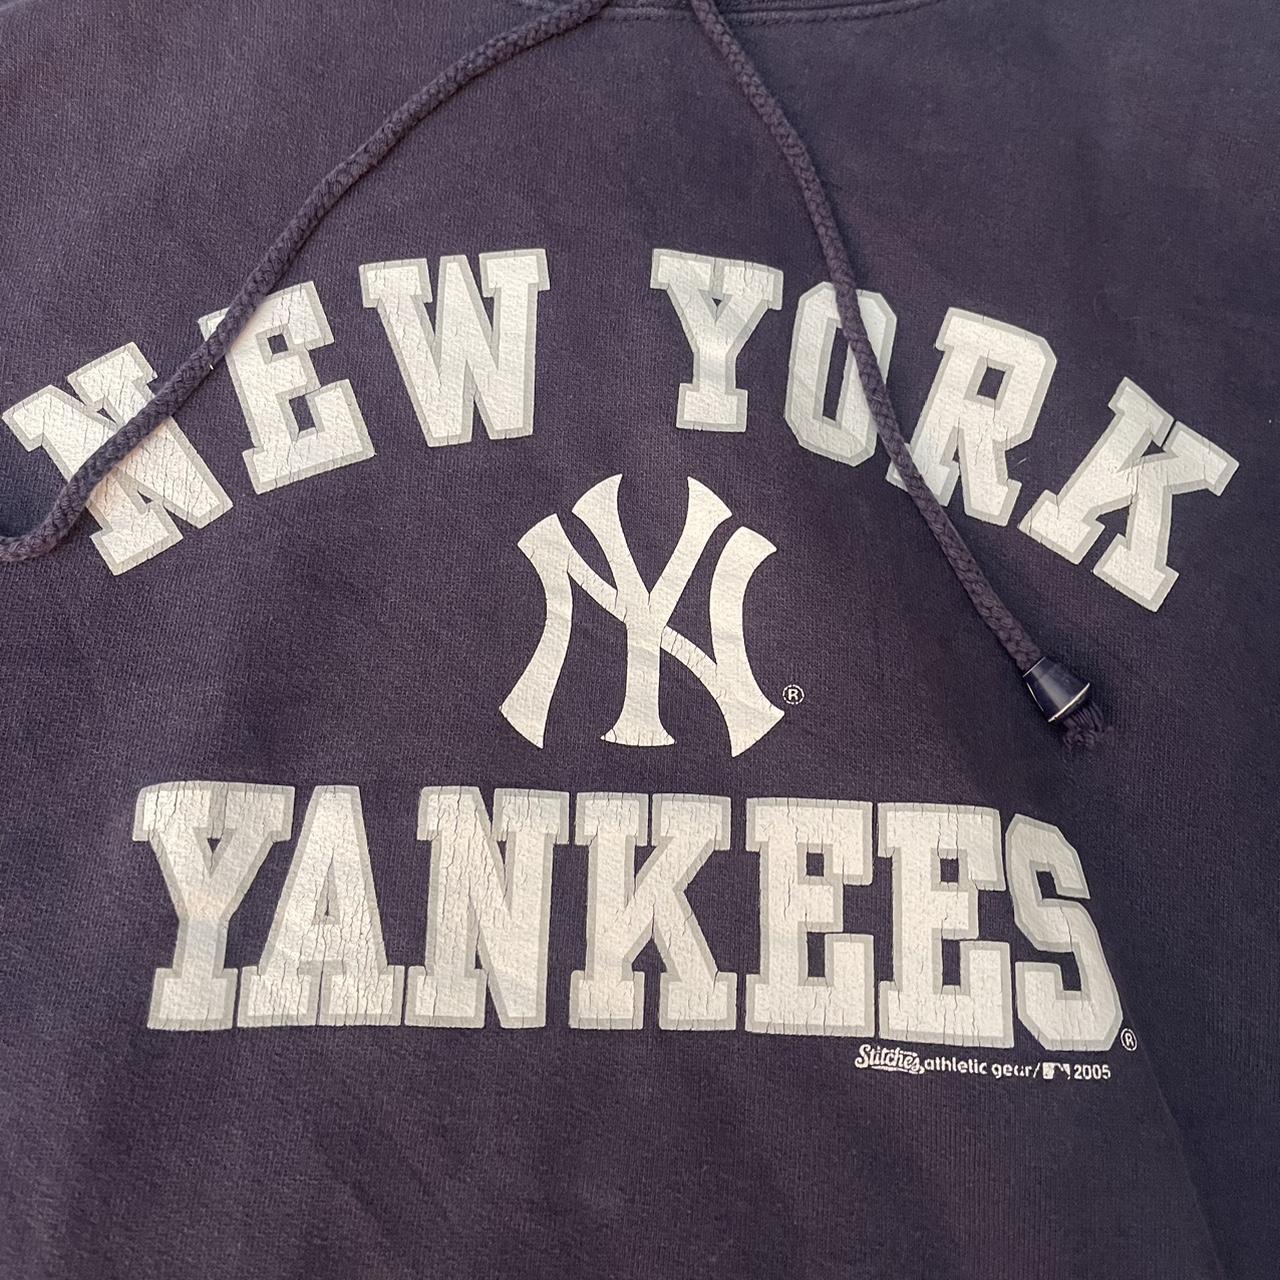 New York Yankees stitches athletic gear Size M - Depop